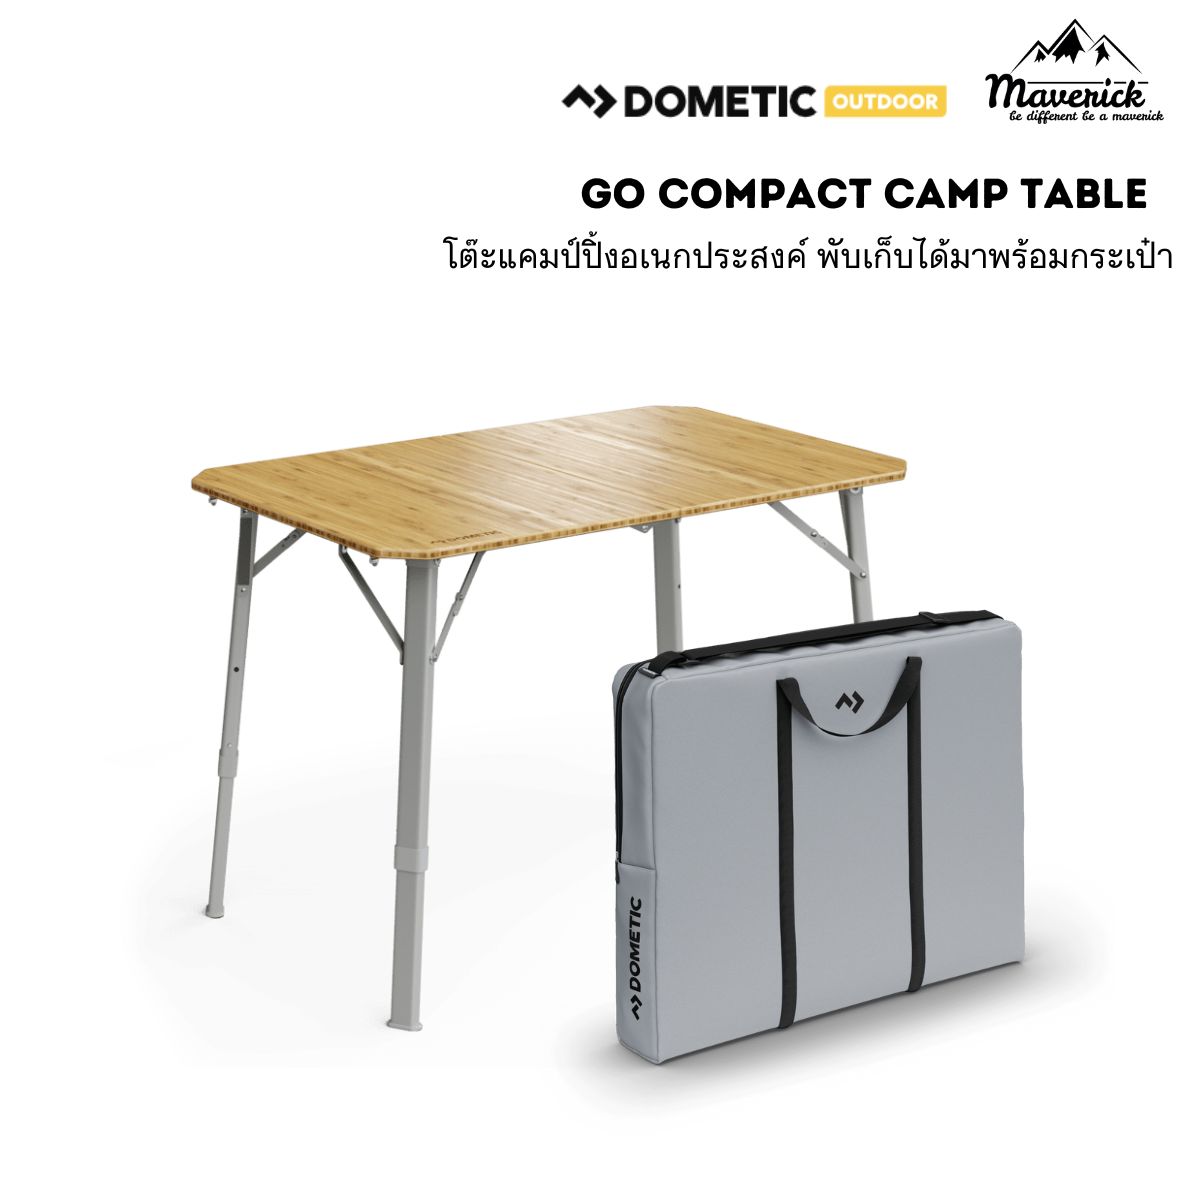 Dometic GO Compact Camp Table